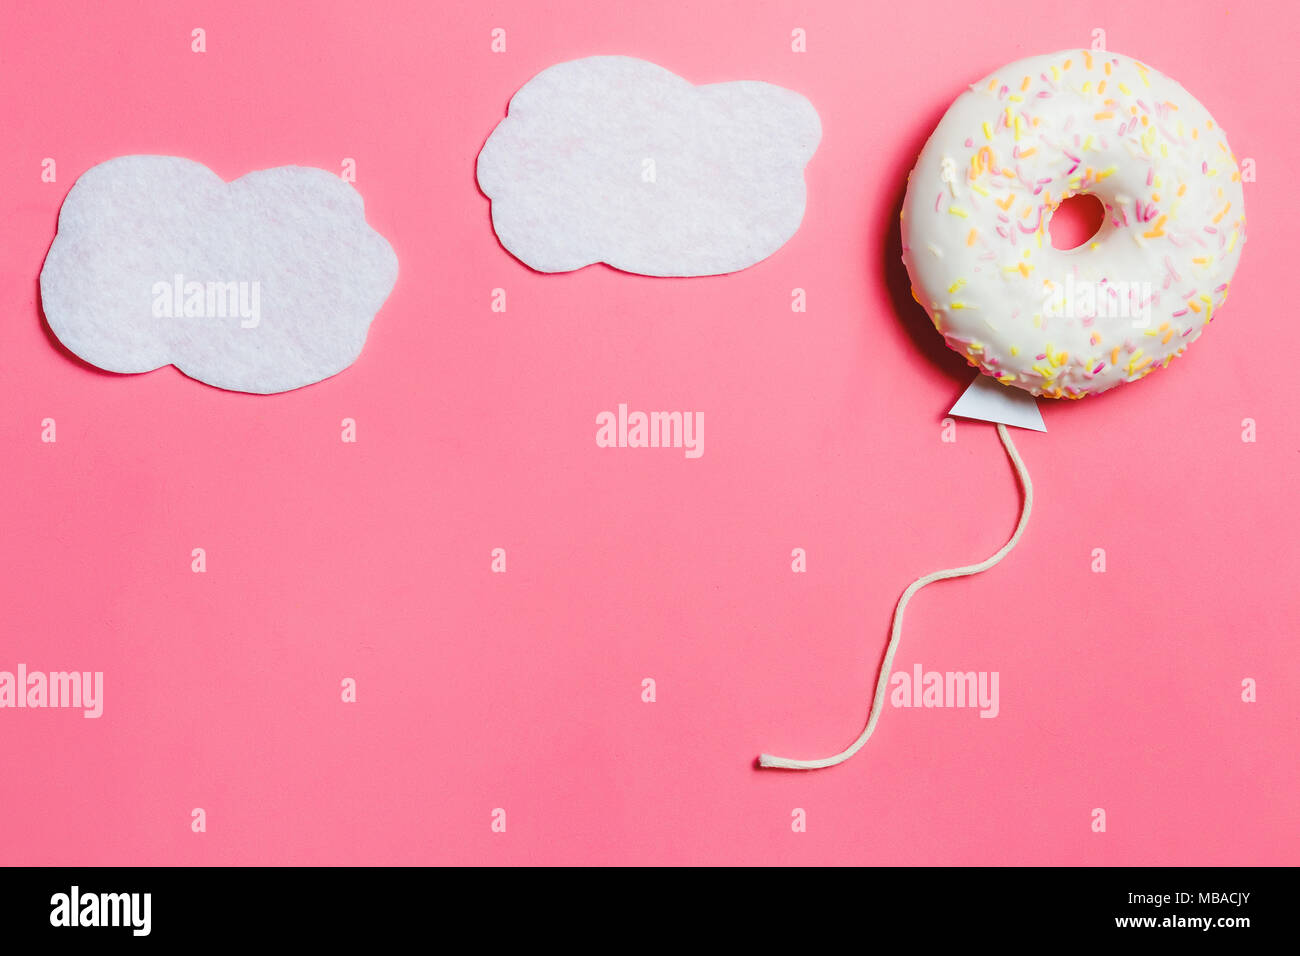 Donut on Pink, Creative Food Minimalism, Donut in Shape of Balloon in Sky with Clouds, Top View with Copy Space, Toned Stock Photo